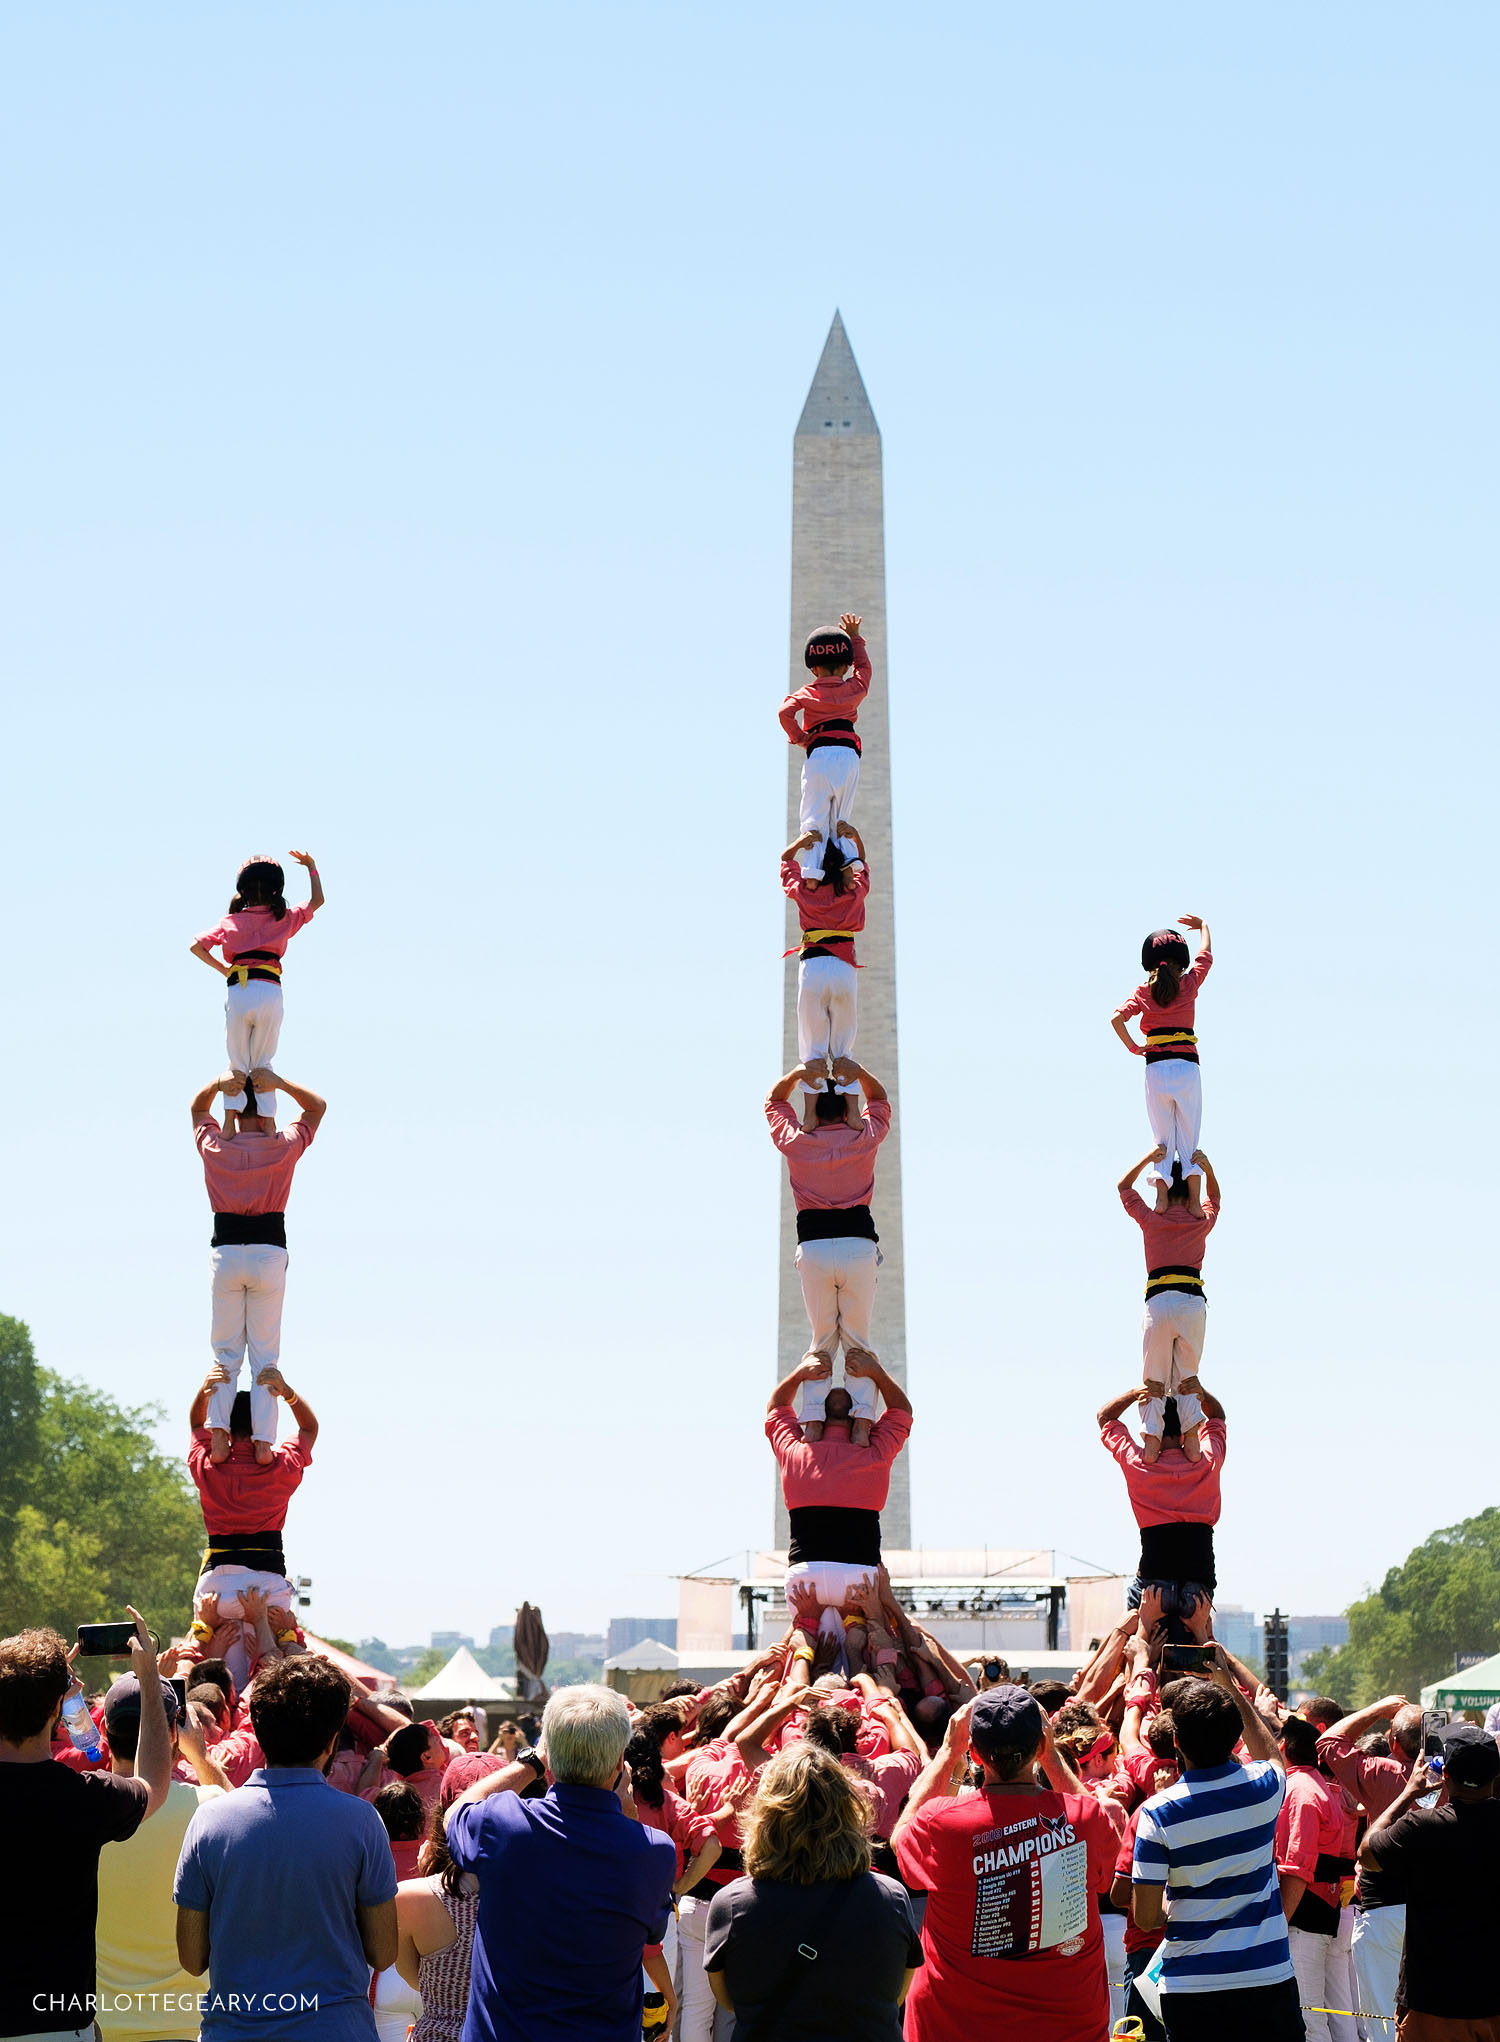 Catalan human tower at the Smithsonian Folklife Festival